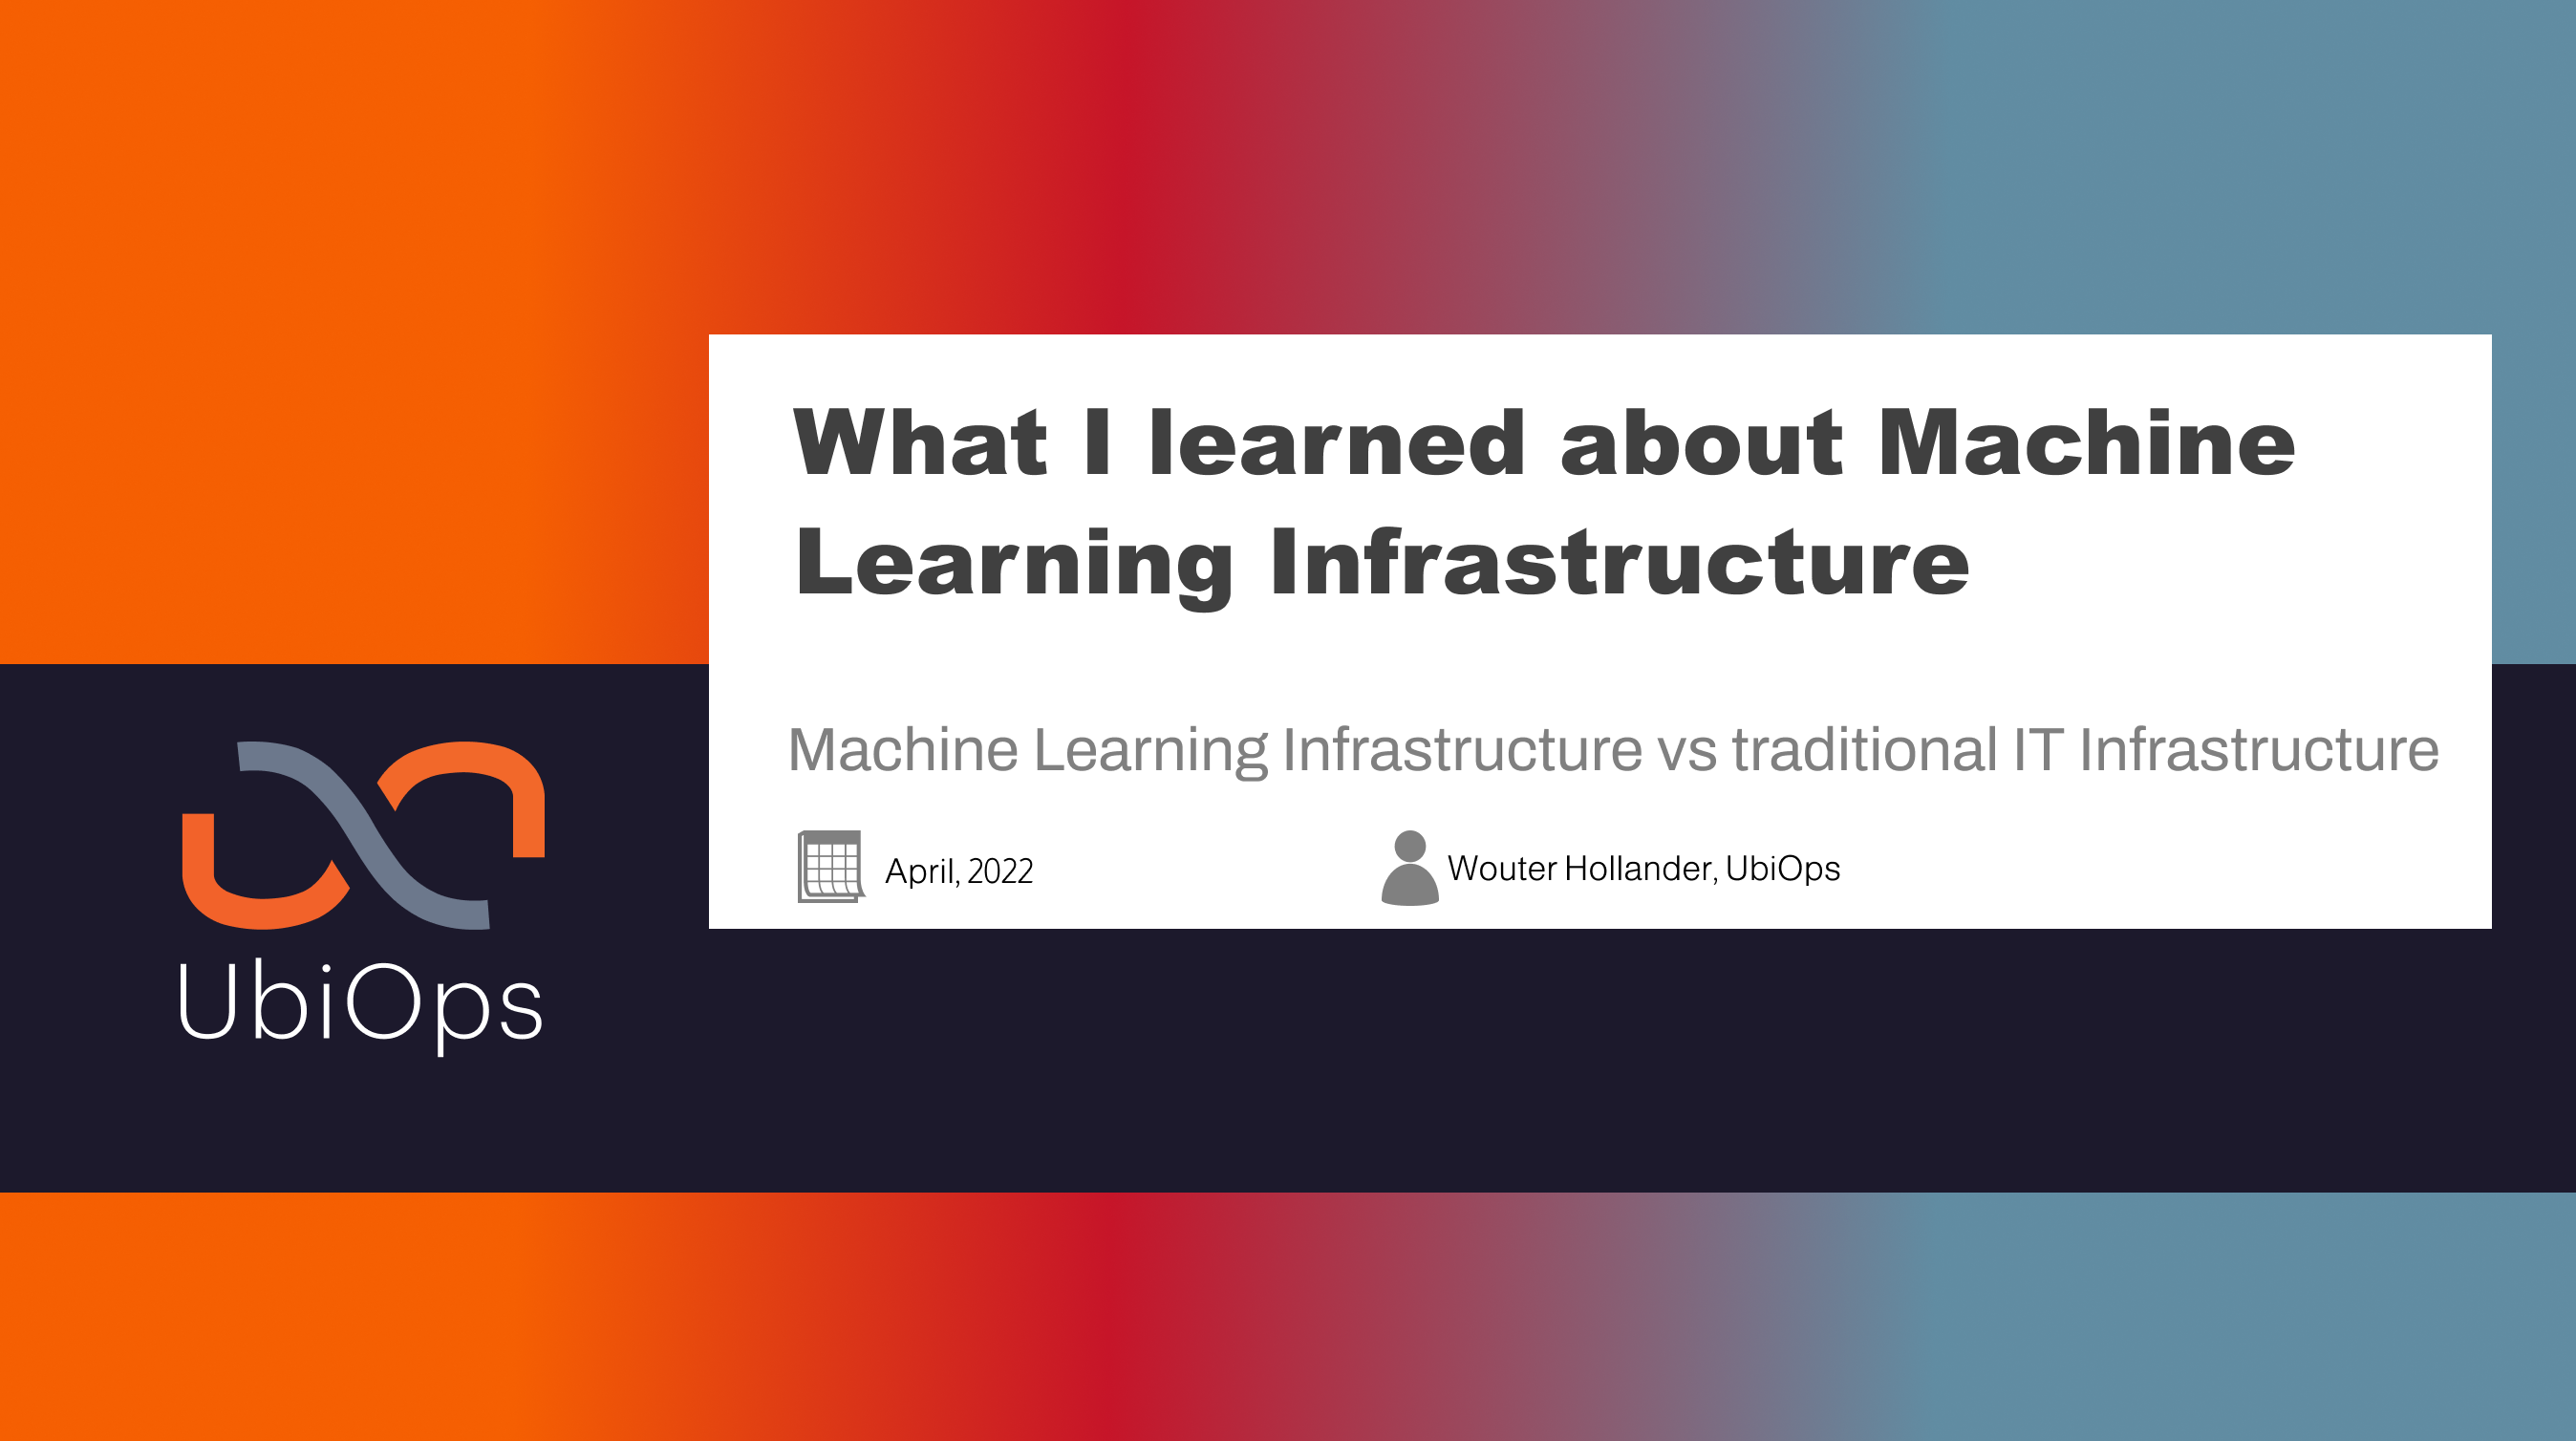 What I learned about Machine Learning Infrastructure